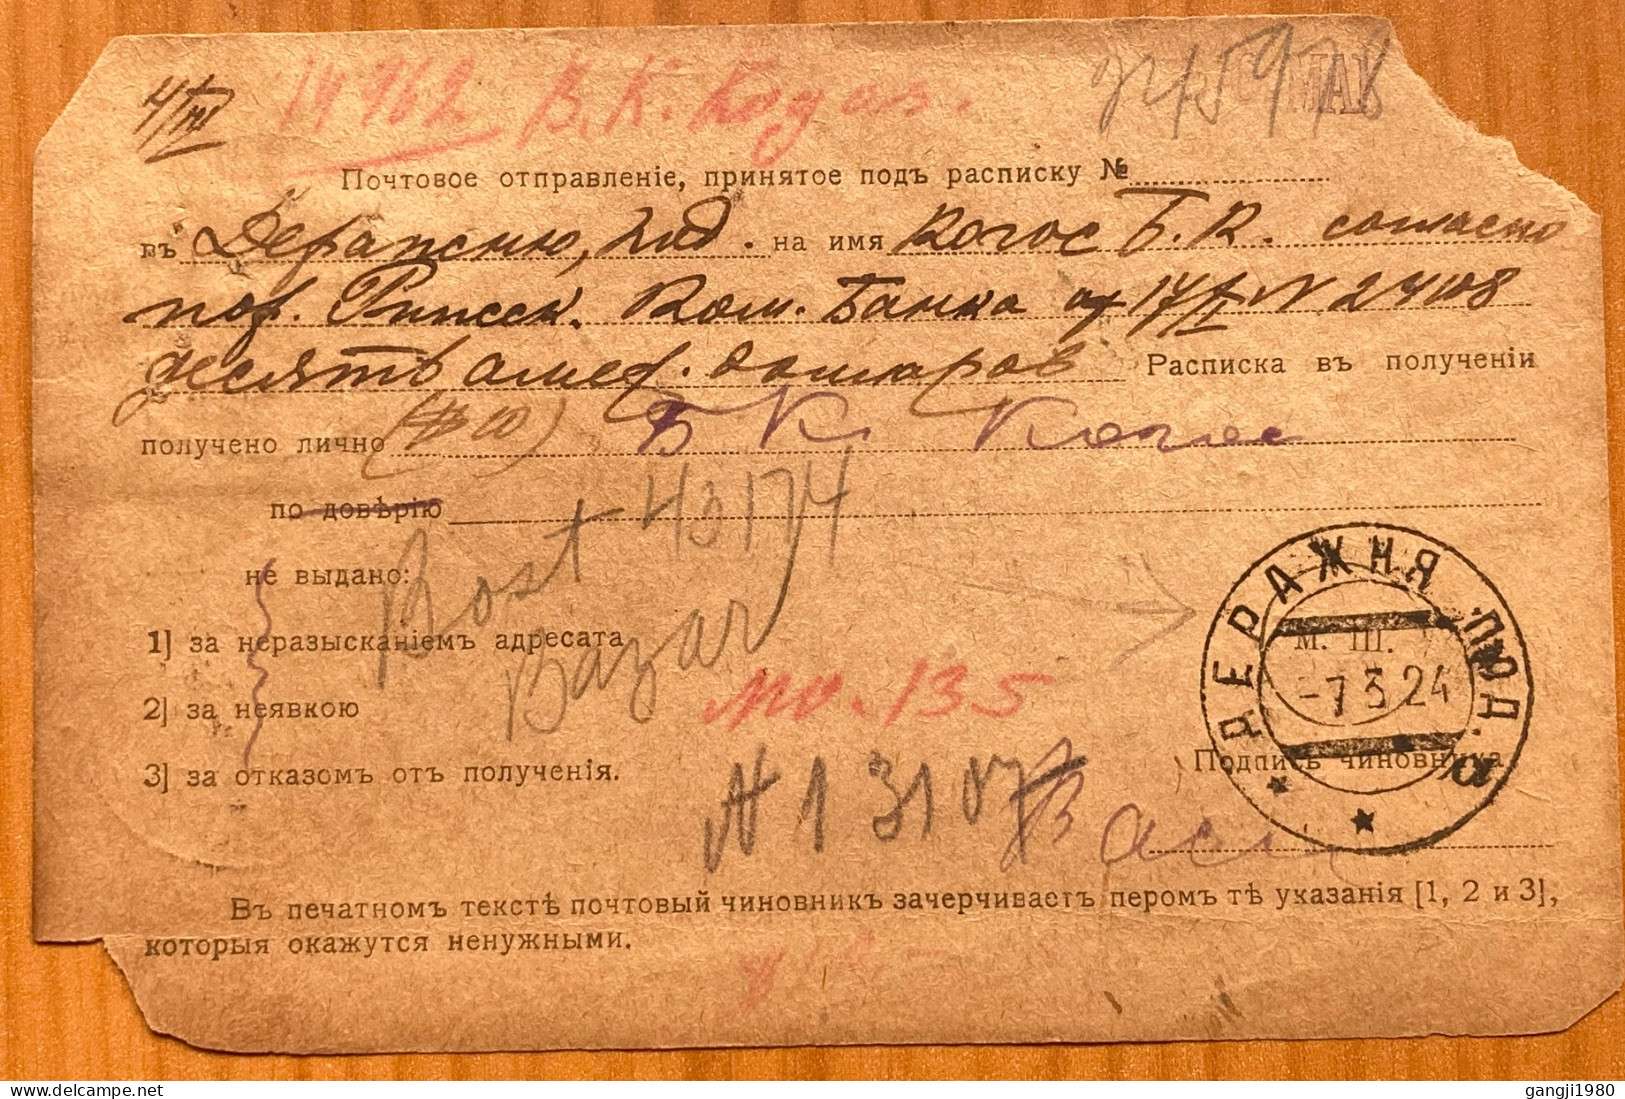 RUSSIA-1924, COVER CARD USED,  LENIN MOURNING IMPERF 6K  STAMP, AEPAXHA, KAMEHE  DEPAZHH.  4  CITY CANCEL - Covers & Documents